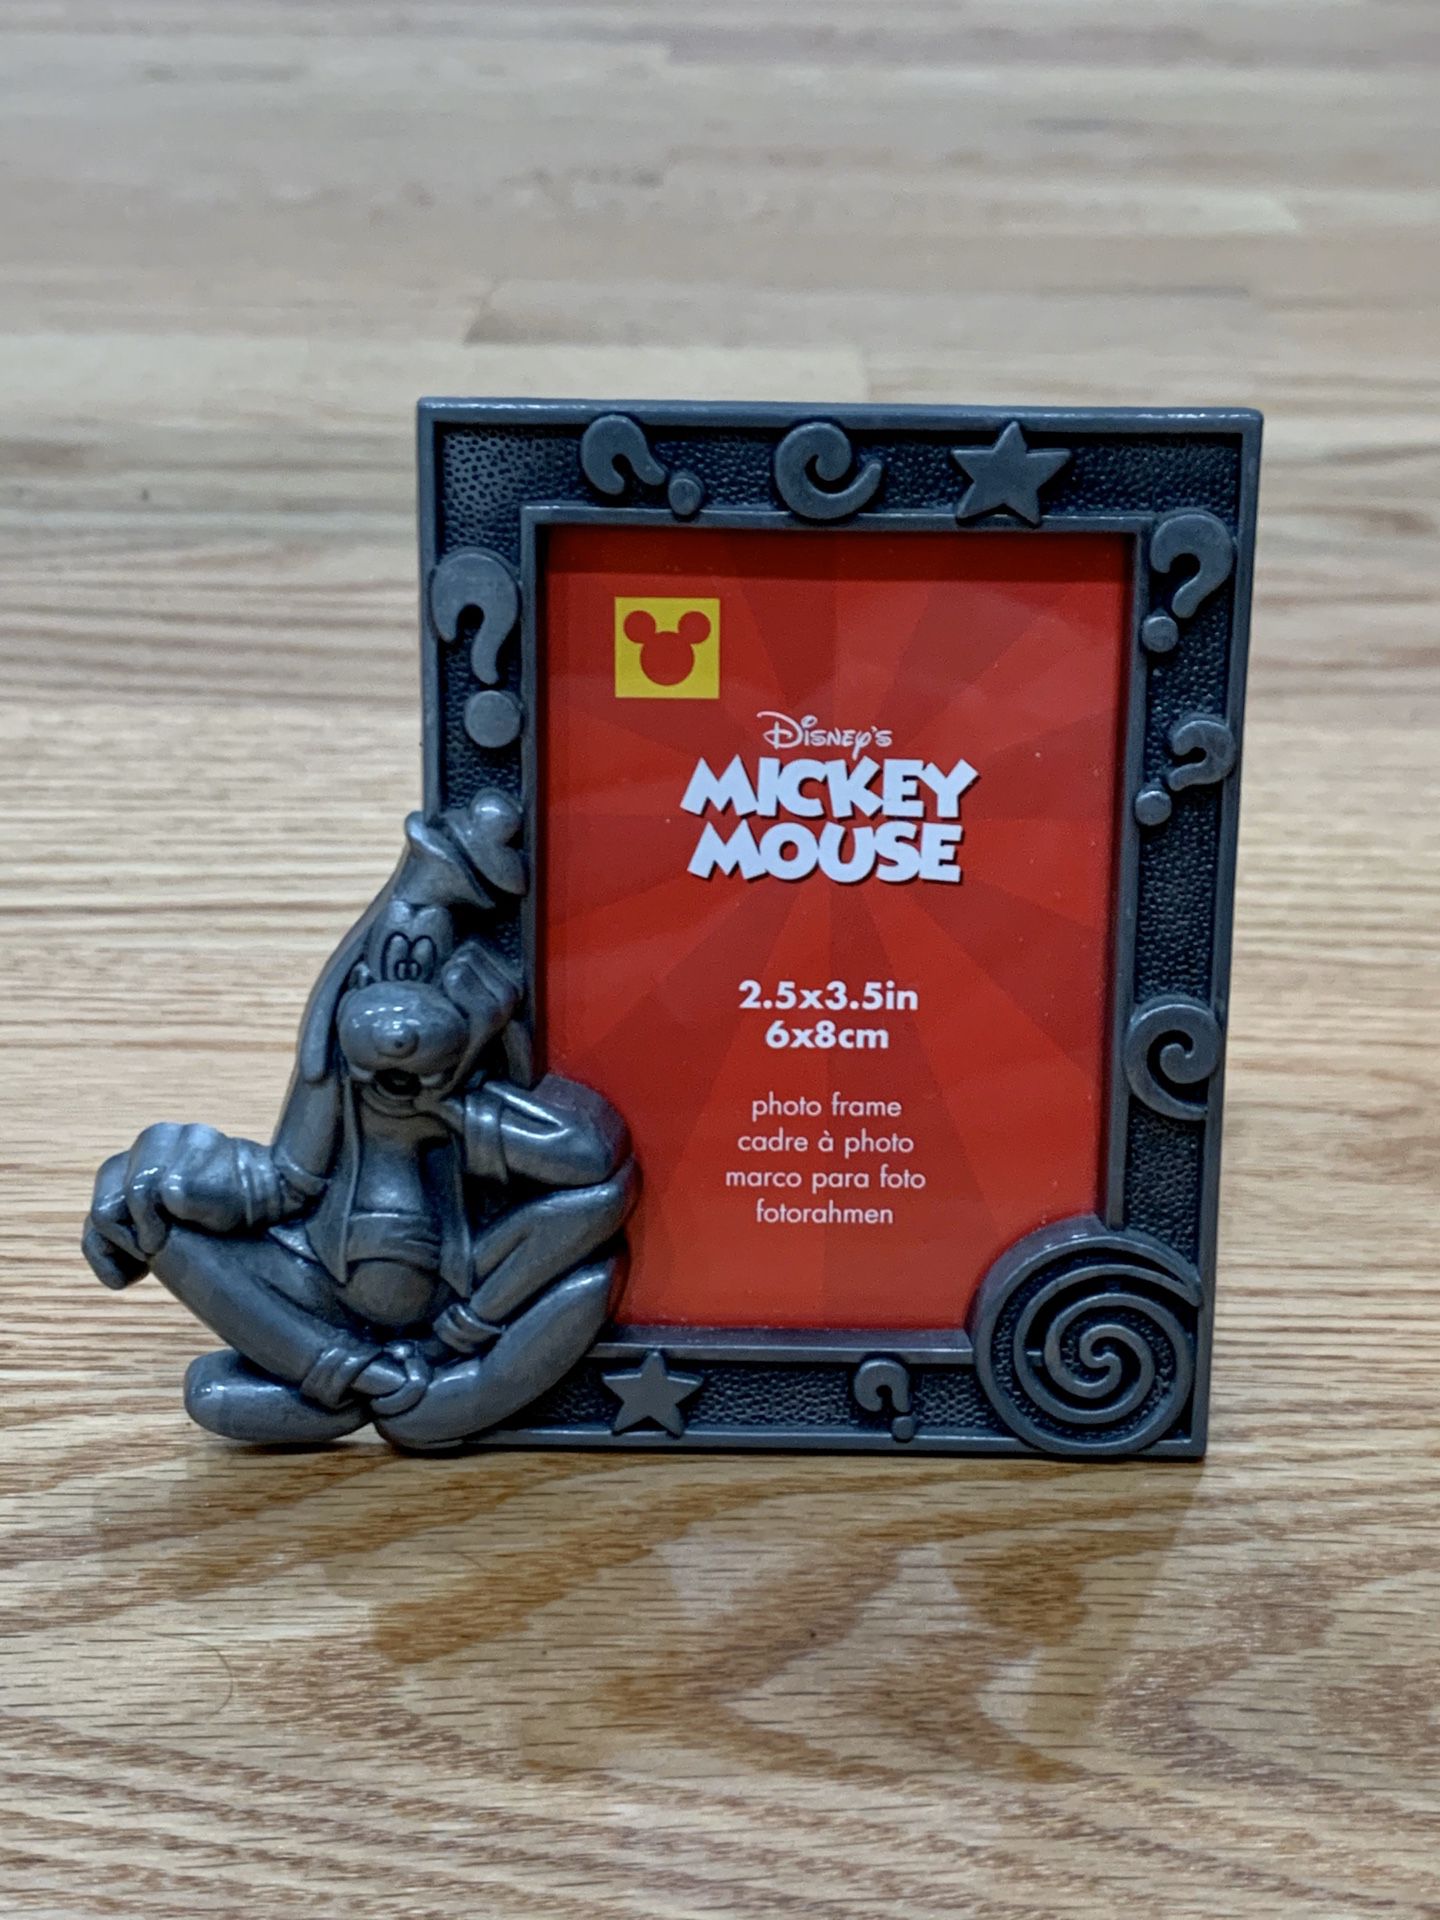 RARE Disney's Mickey Mouse Goofy PICTURE FRAME PEWTER 2.5x3.5” Photo